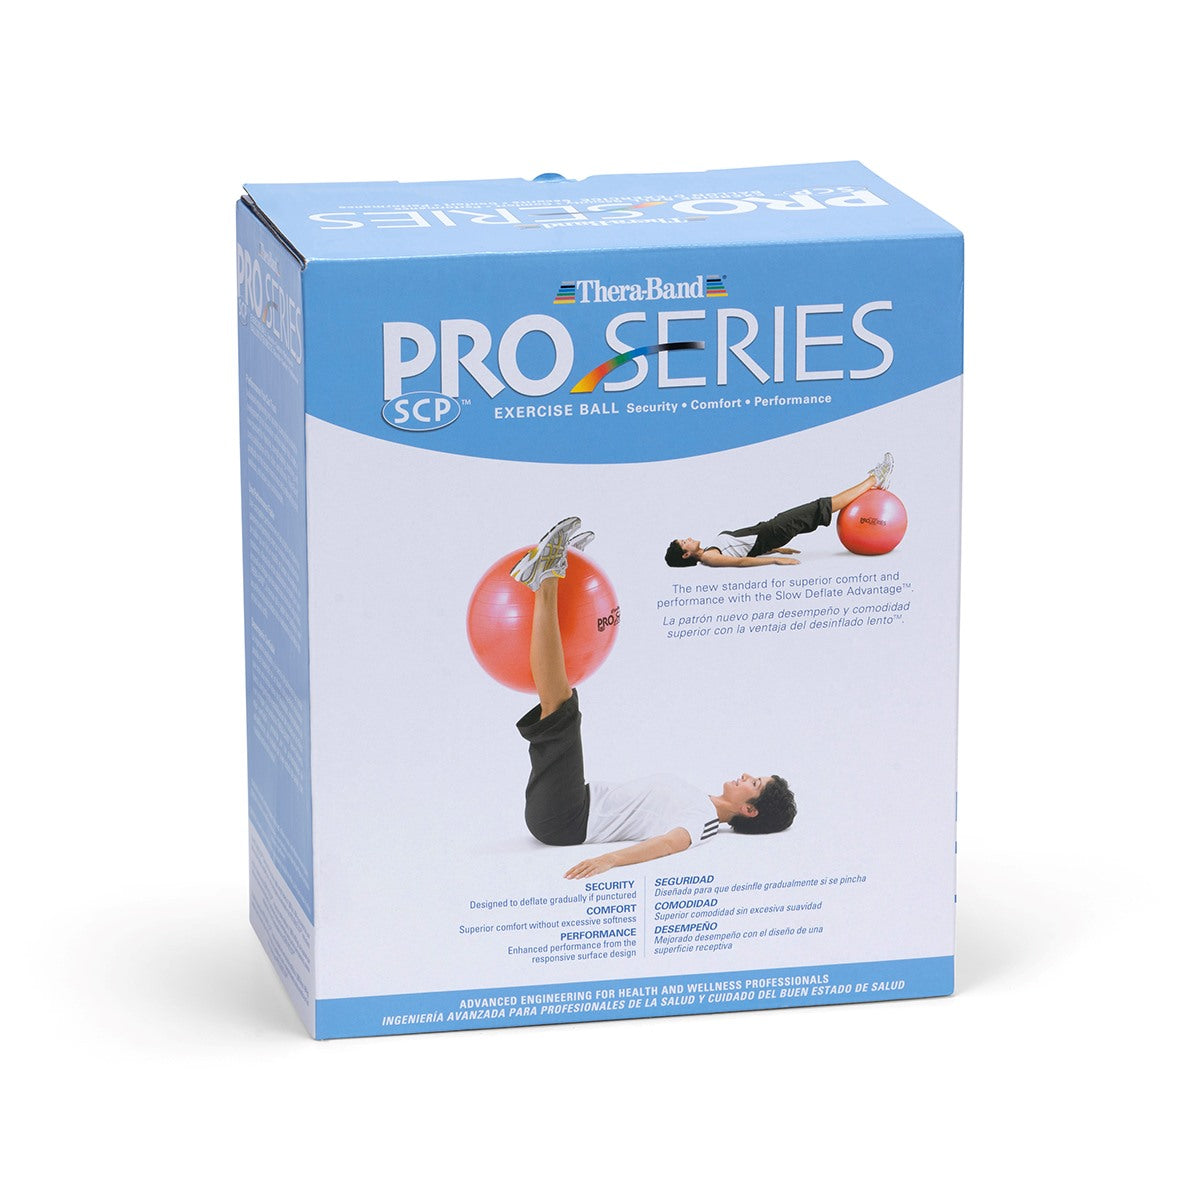 Theraband PRO Series SCP Exercise Ball